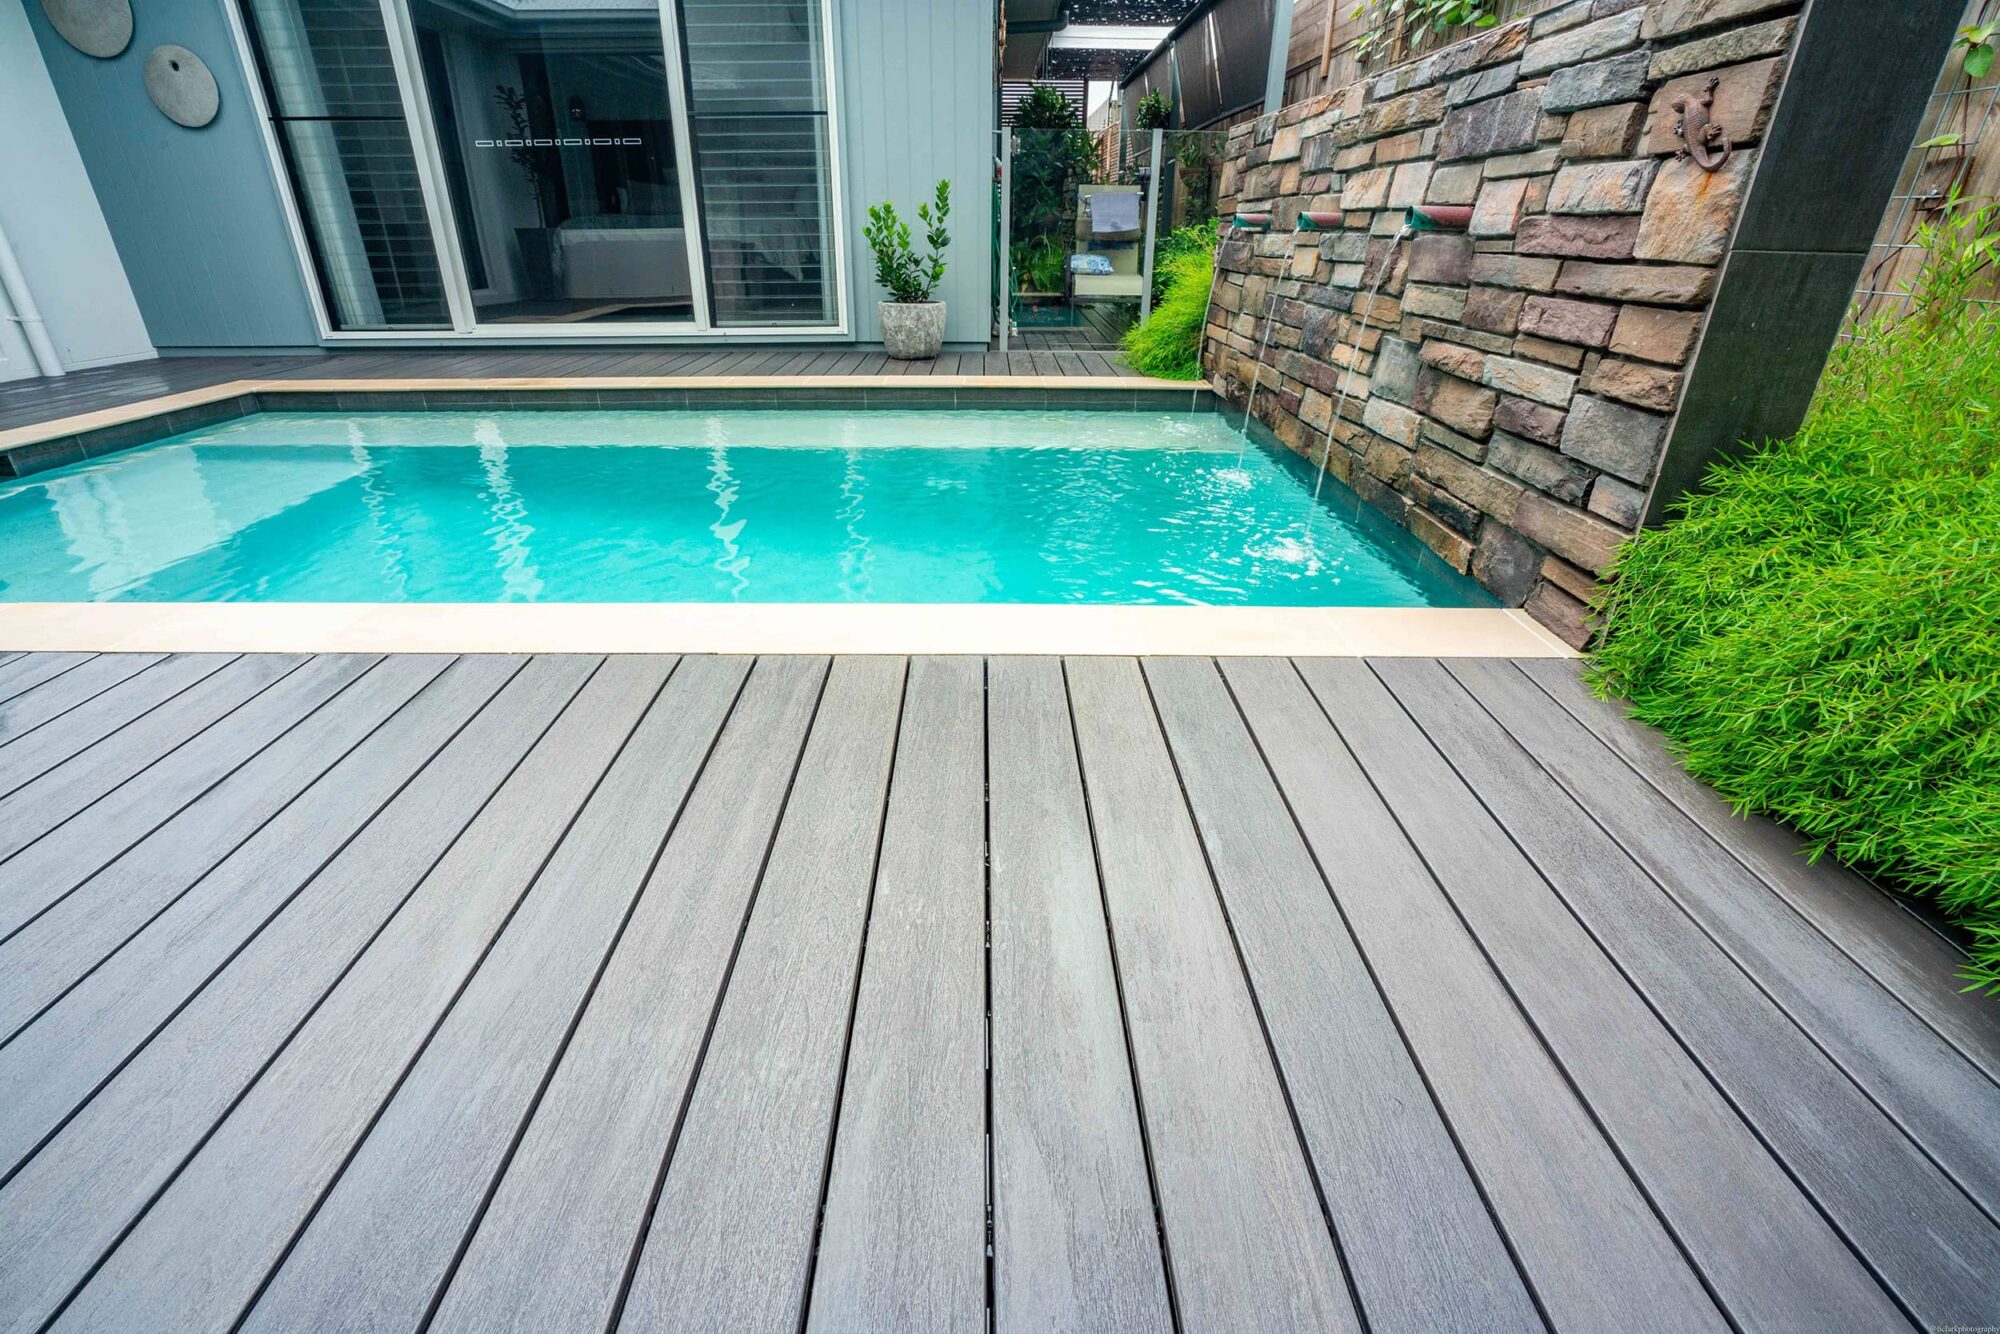 The benefits of Fiberon decking include: